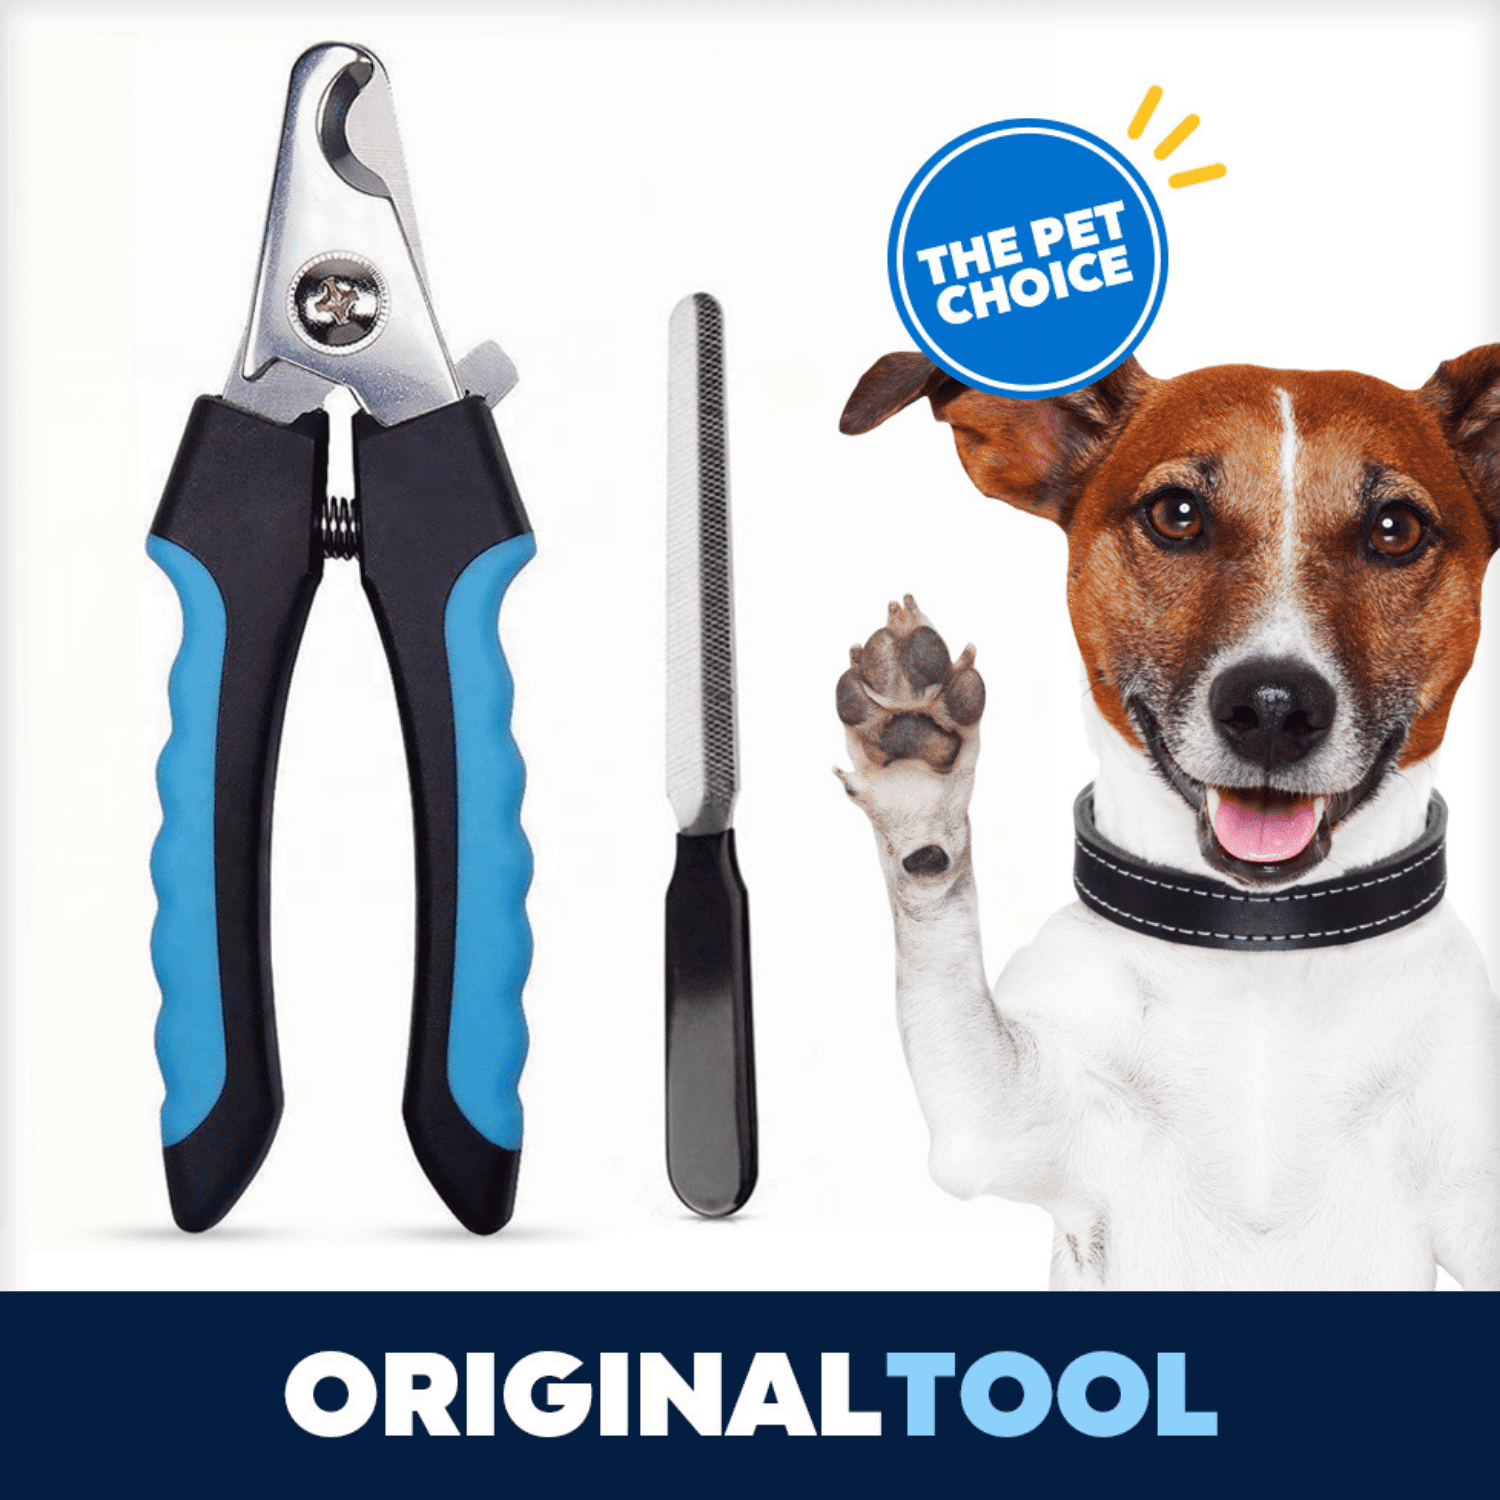 Blue Dog Nail Clippers and Trimmer With Safety Guard Avoid Over Cutting Toenail Razor Sharp Blades Small Medium Large Breeds 33f135d1 9845 4223 b7ee b4071f8fb6eb.c5081b2a5f41477de0fe7f7c201354b9